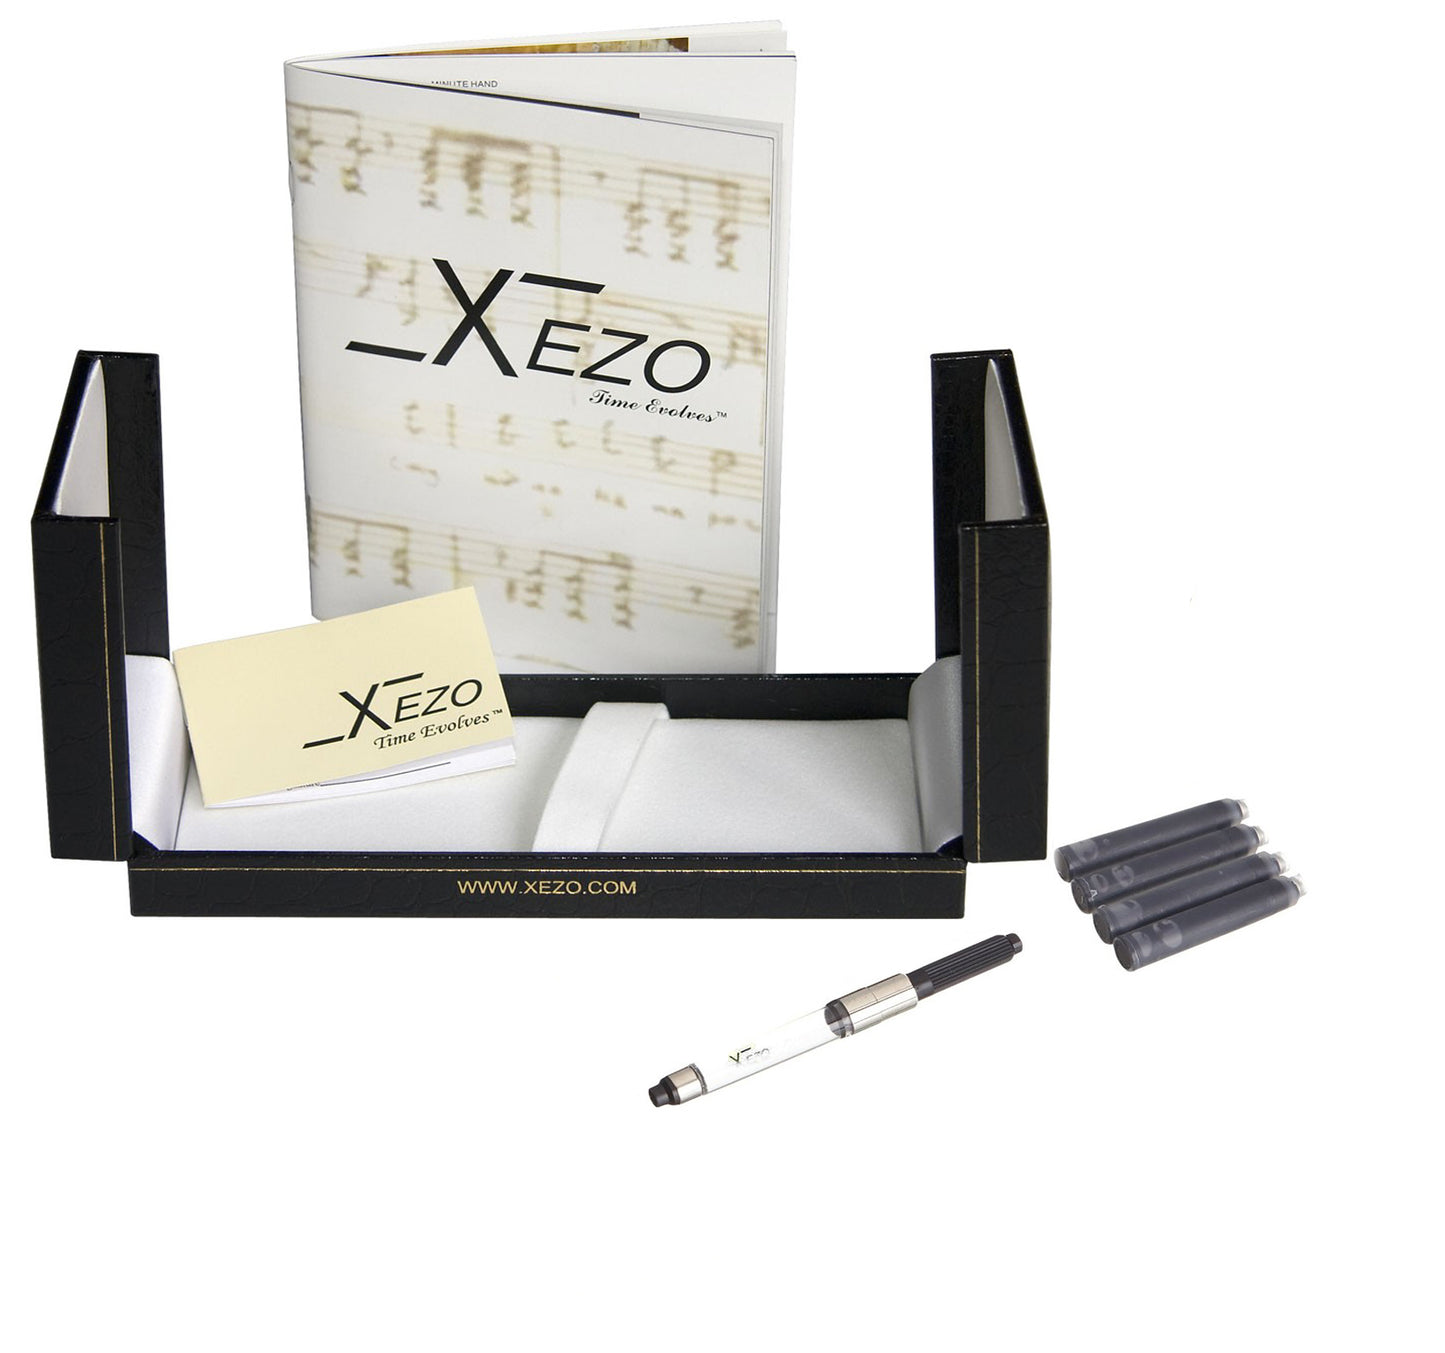 Xezo - Black gift box, certificate, manual, chrome-plated ink converter, and four ink cartridges of the Maestro White MOP FM fountain pen